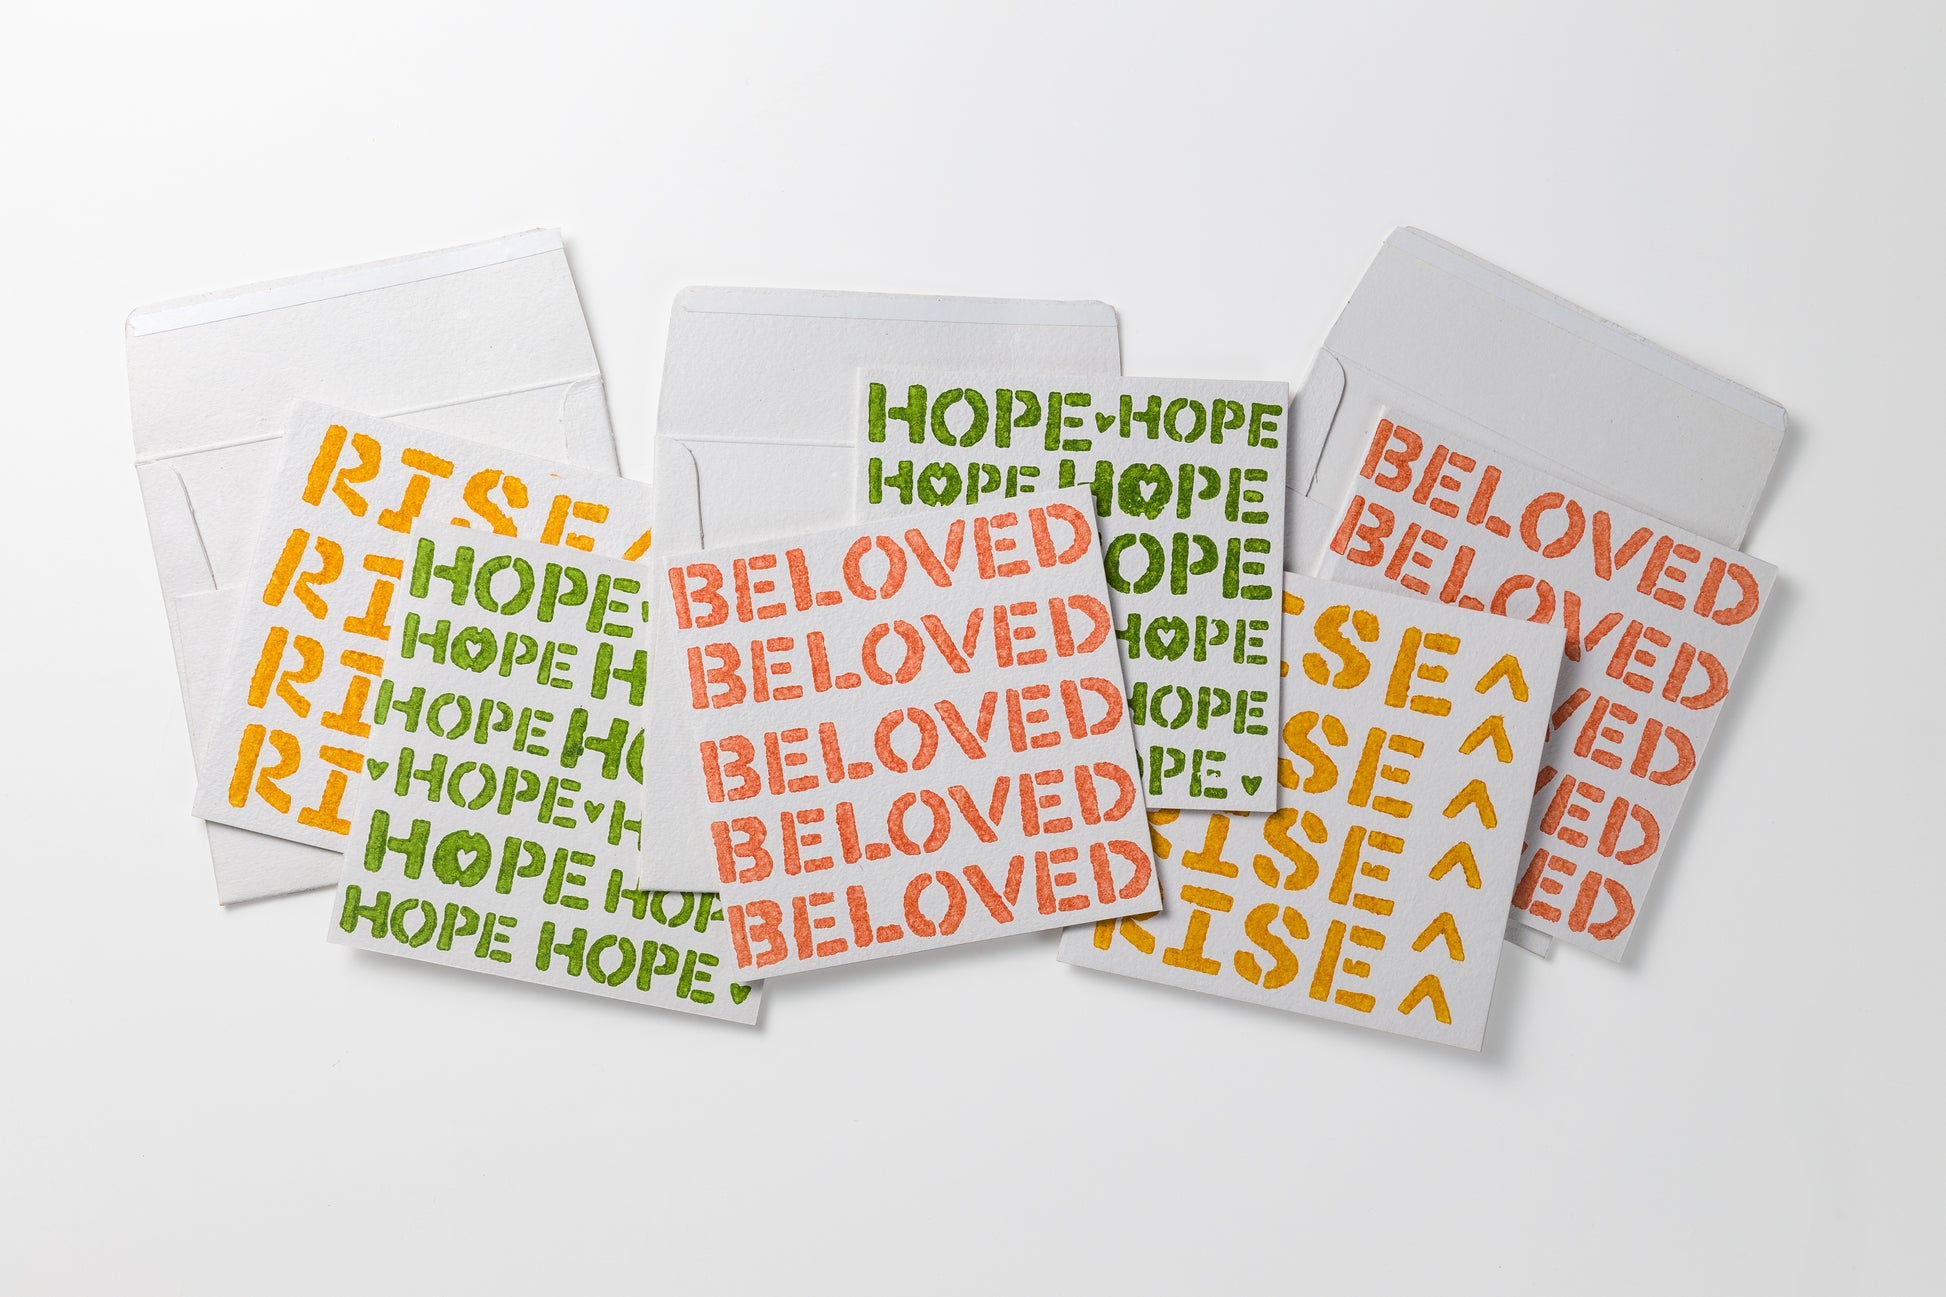 Notecard set of six cards with two of each word (Beloved, Hope, Rise) and envelopes.